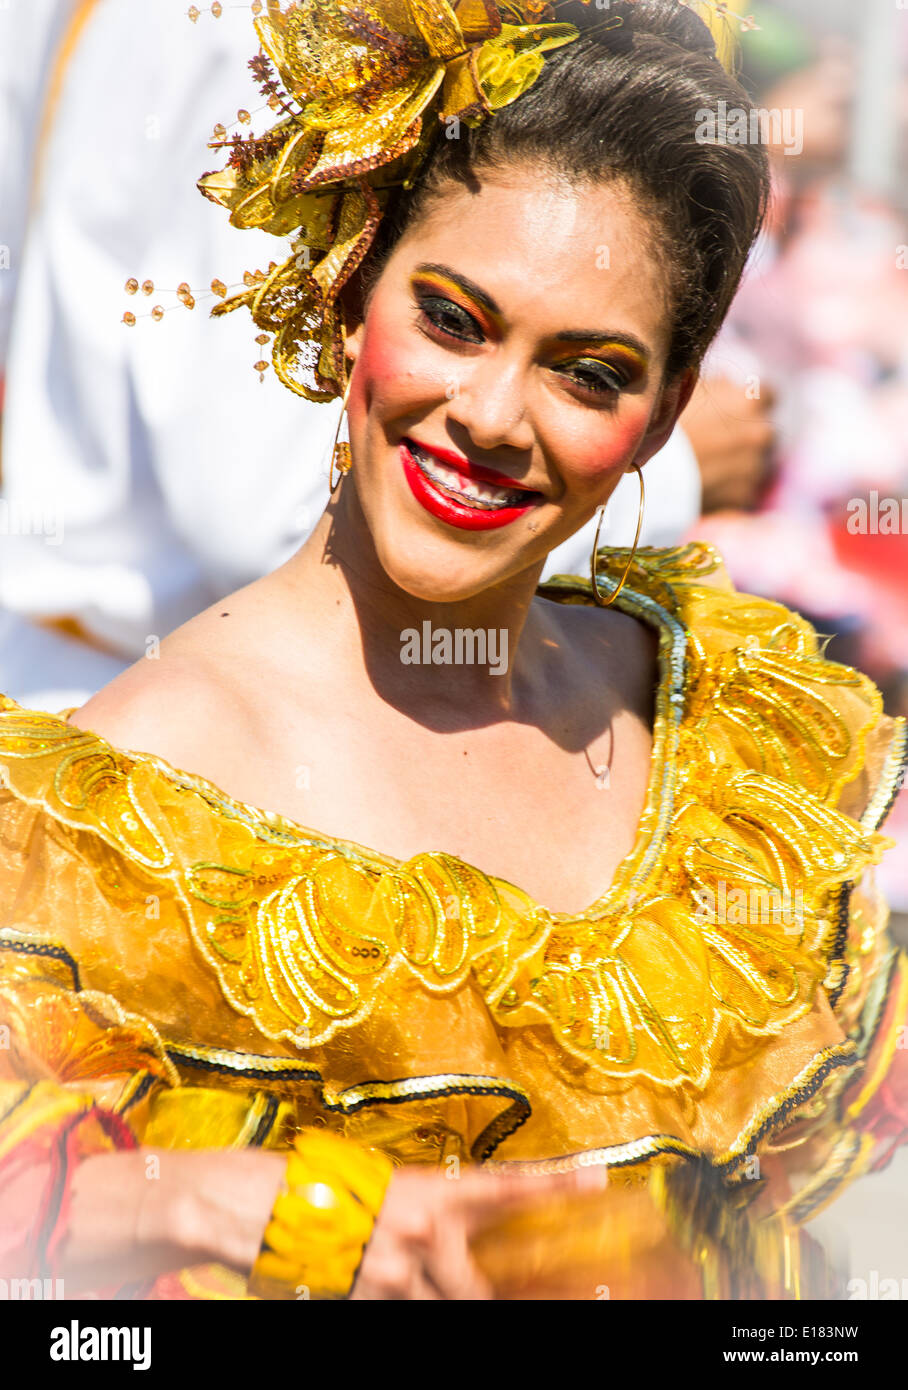 Barranquilla, Colombia - March 1, 2014 - Performers in elaborate costume sing, dance, and stroll their way down the streets of Barranquilla during the Battalla de Flores during Carnival Stock Photo